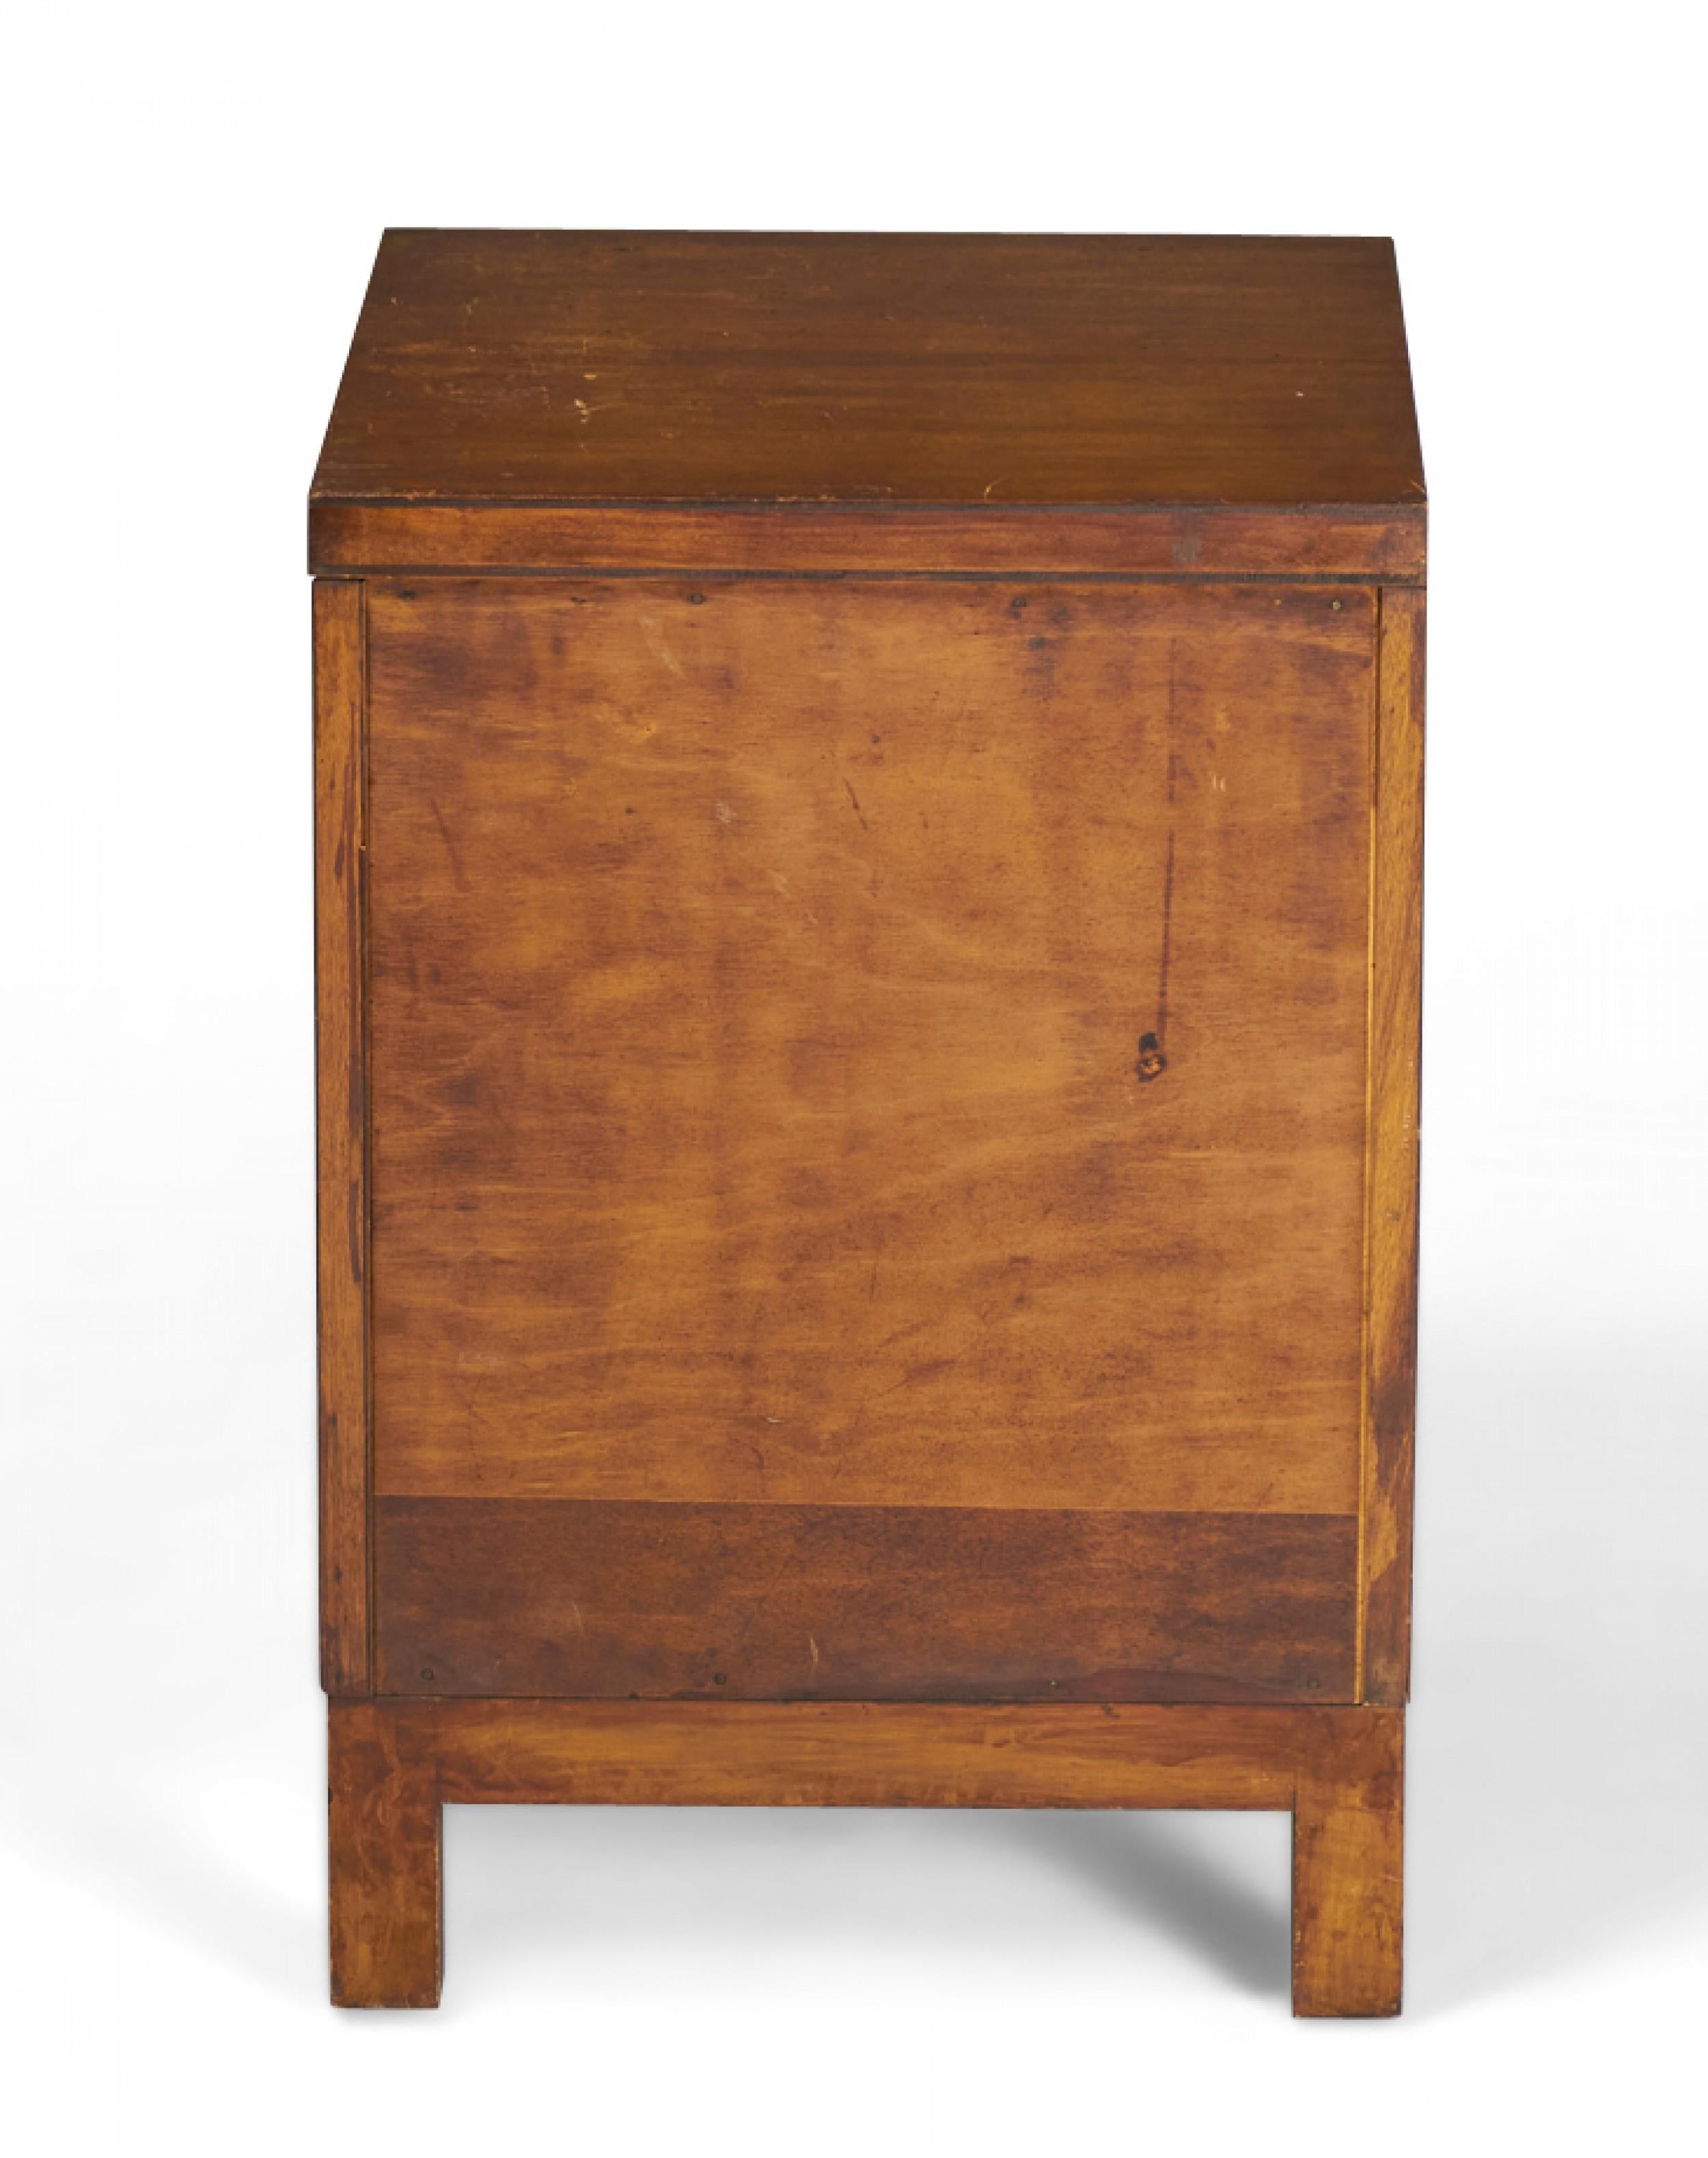 Widdicomb Modern Three Drawer Dark Stained Walnut Nightstand In Good Condition For Sale In New York, NY